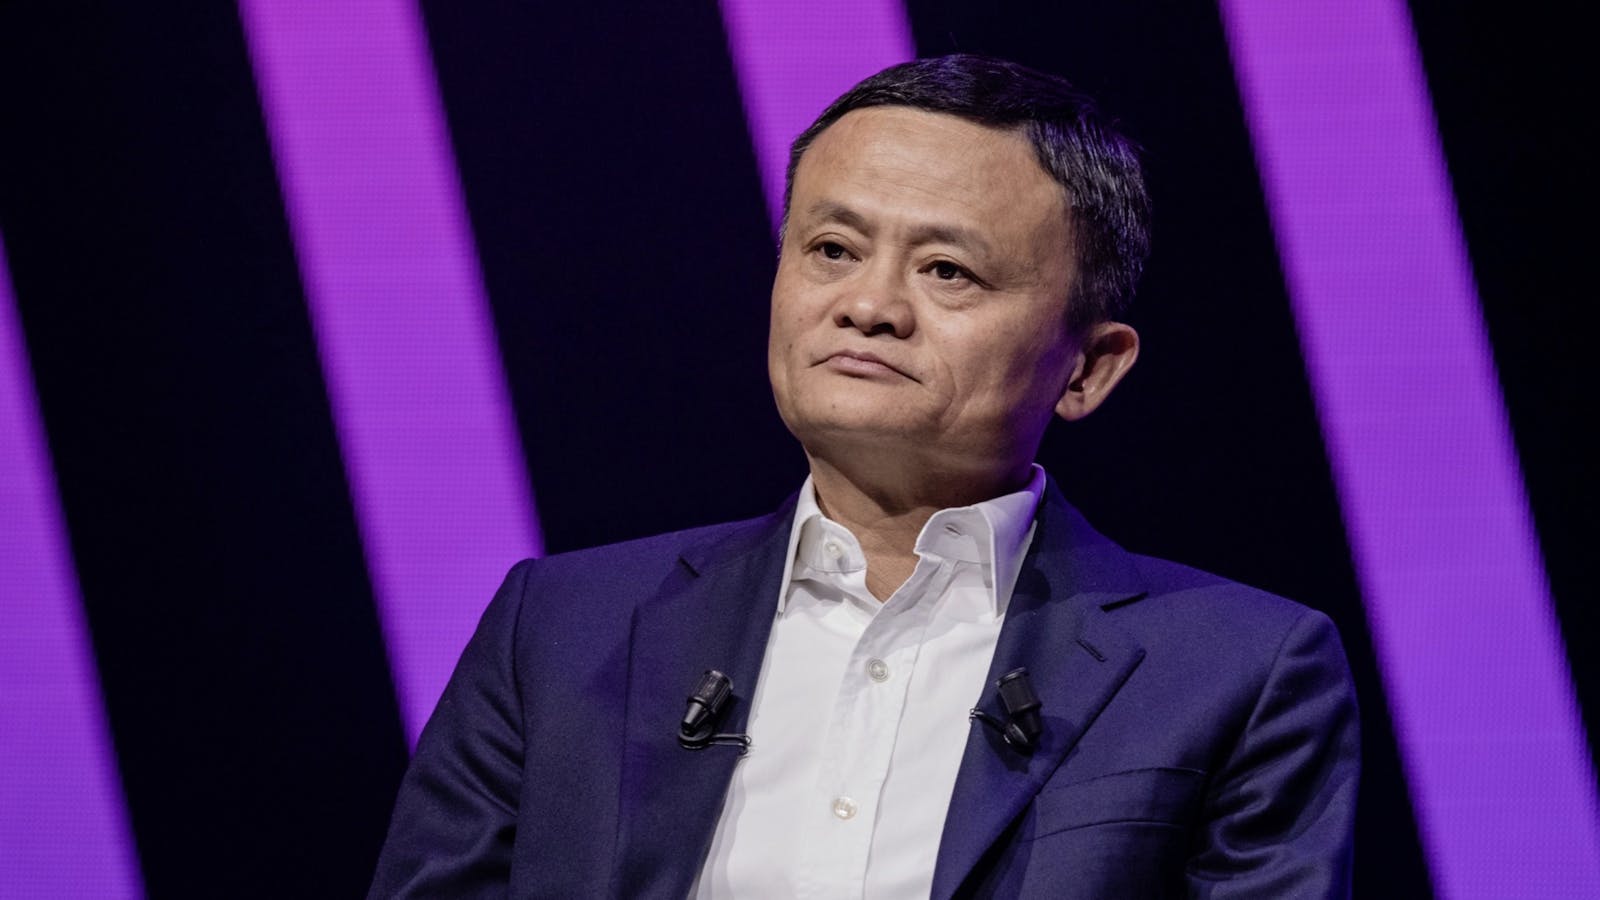 Jack Ma, co founder of Alibaba and the controlling shareholder of Ant. Photo by Bloomberg